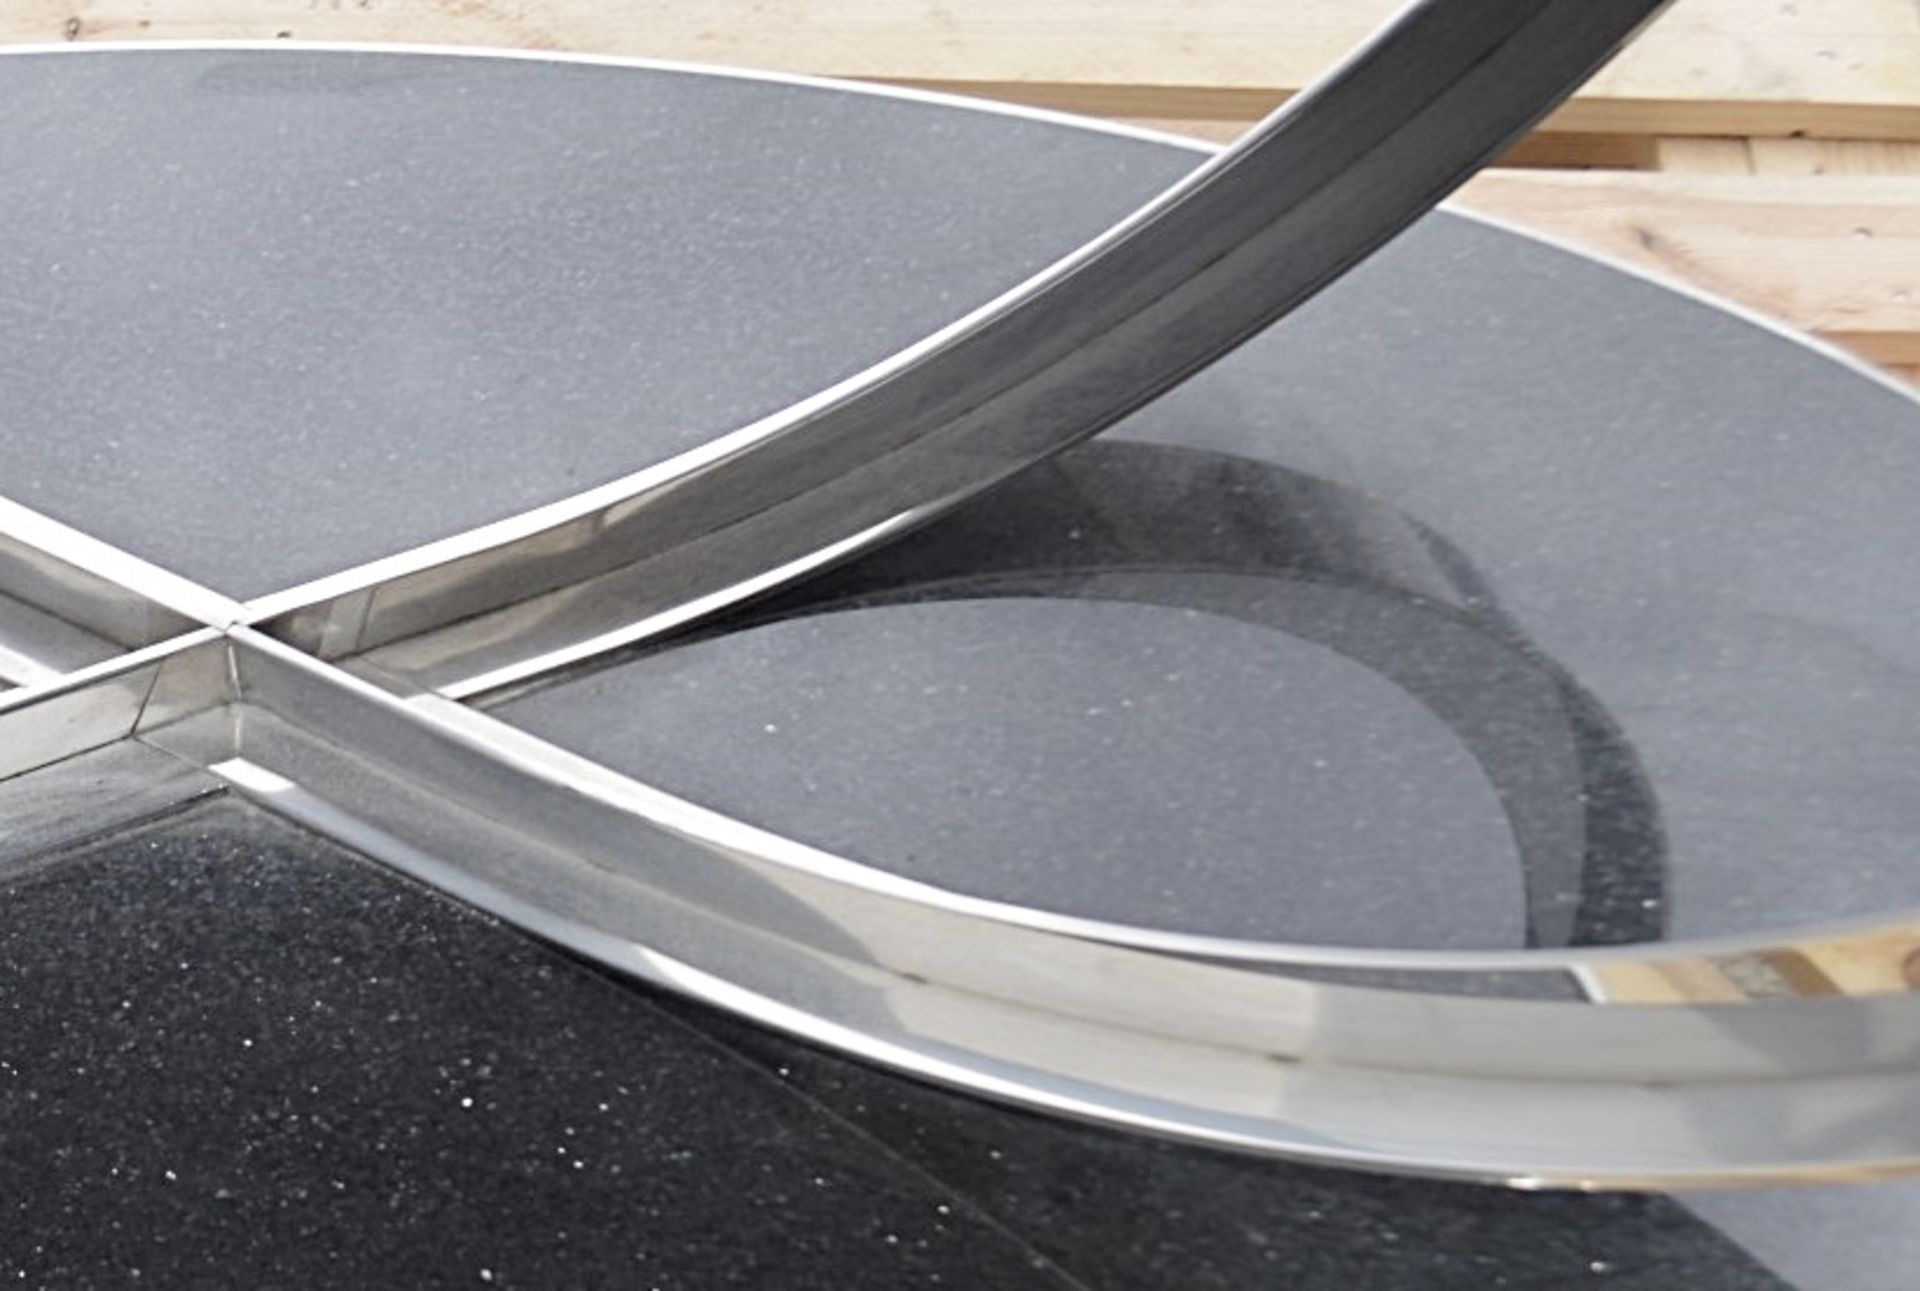 1 x Stunning 1.5 Metre Metal Oval Table With A Granite Style Surface And Sculptural Cross Base - Image 3 of 3